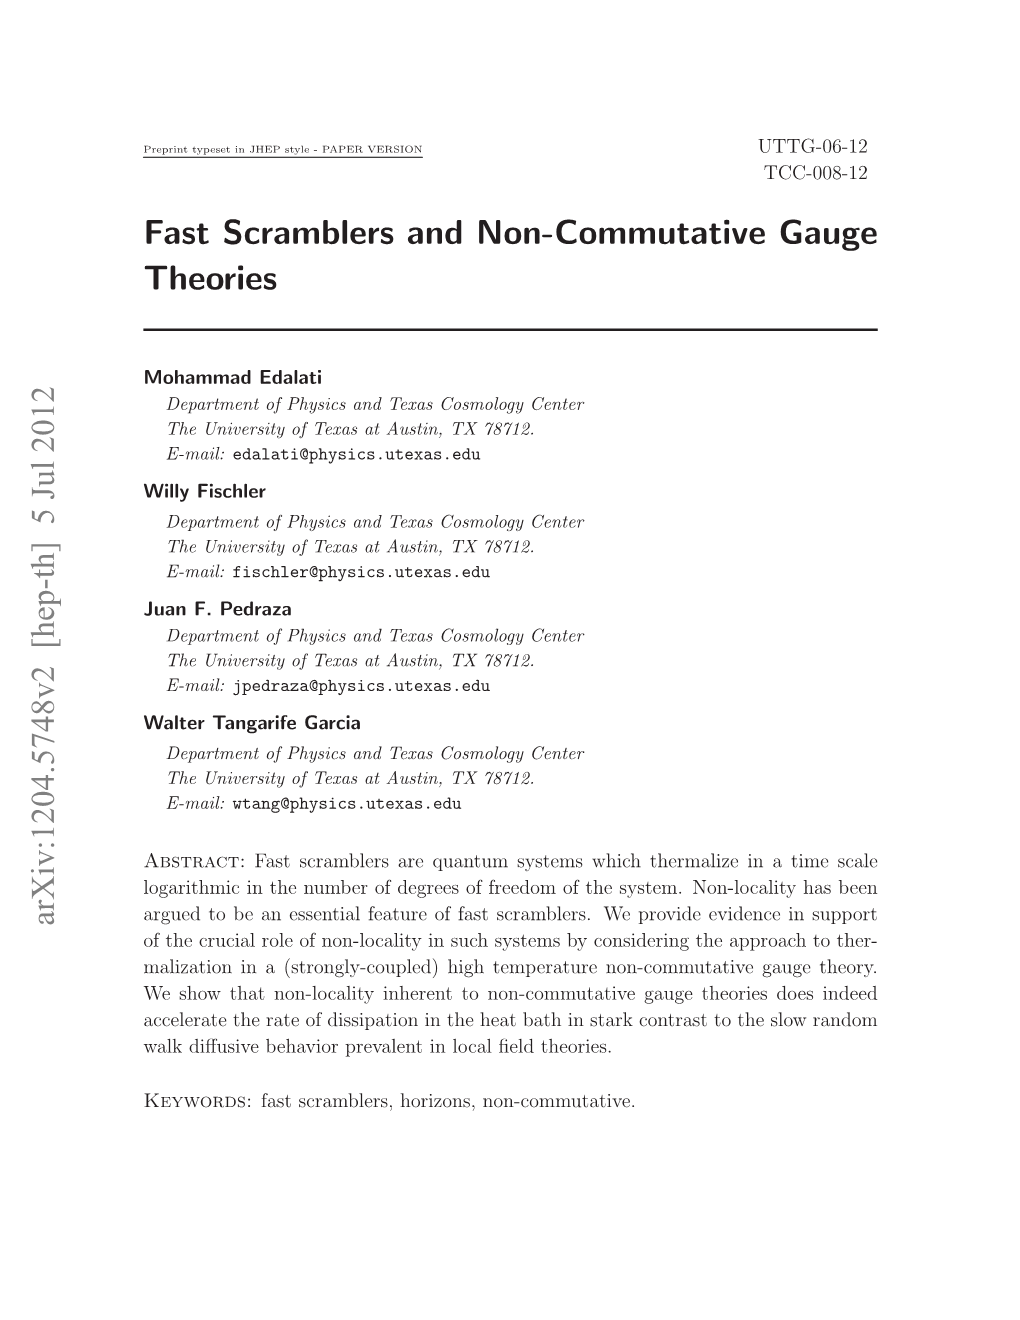 Fast Scramblers and Non-Commutative Gauge Theories